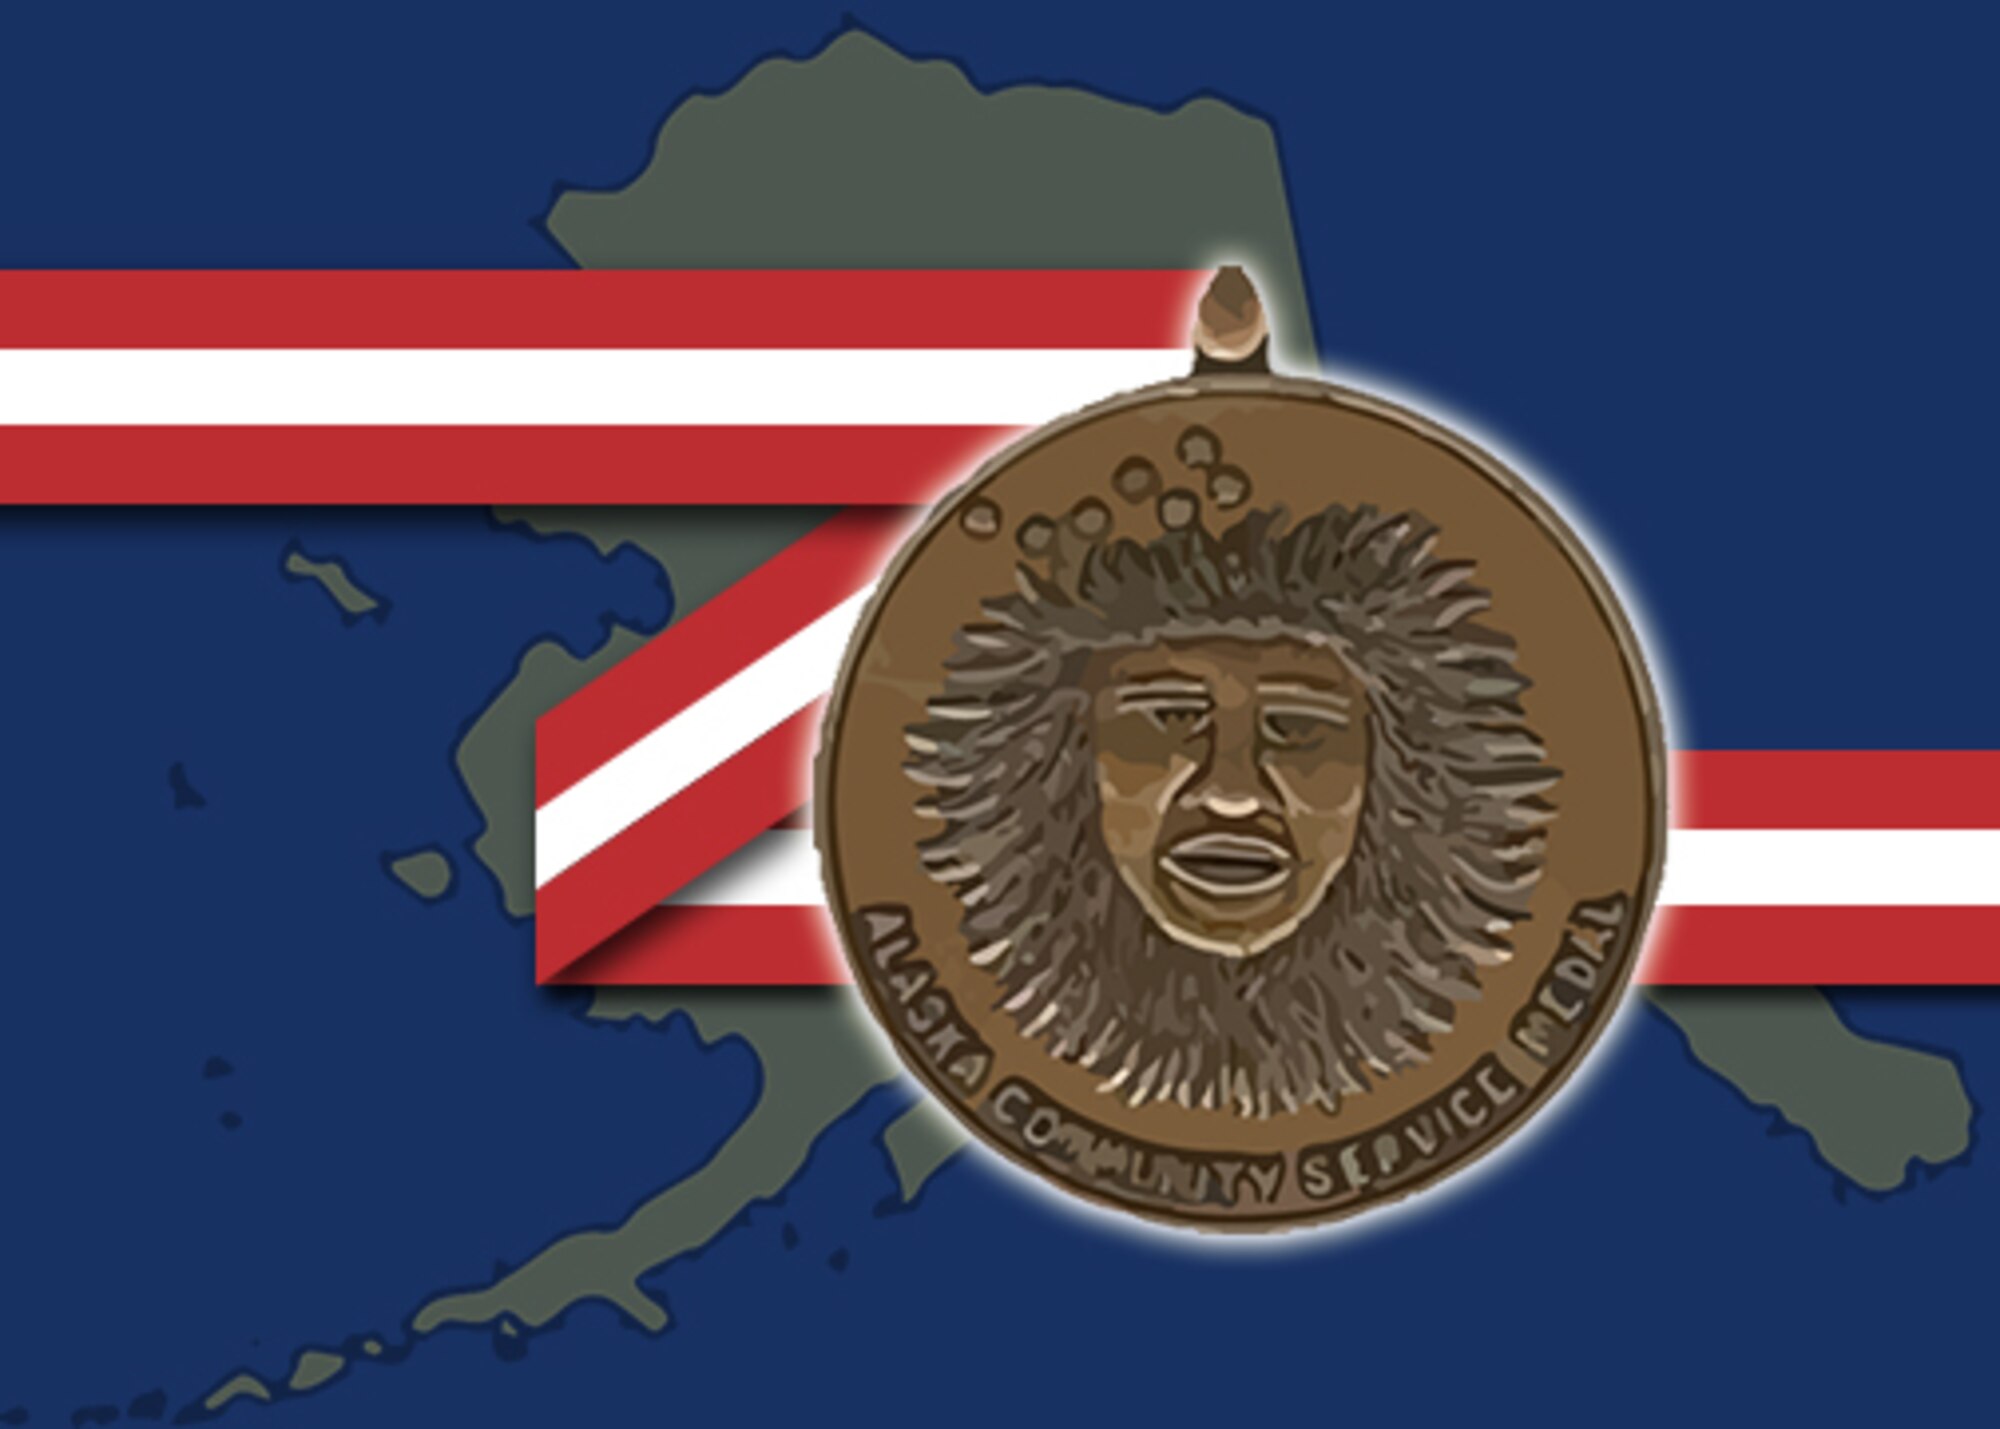 Maj. Ryan Tilbury, an Individual Mobilization Augmentee exercise planner with U.S. Pacific Command, recently received the Alaska Community Service Medal for six years of service on the state’s Veterans Advisory Council. 
